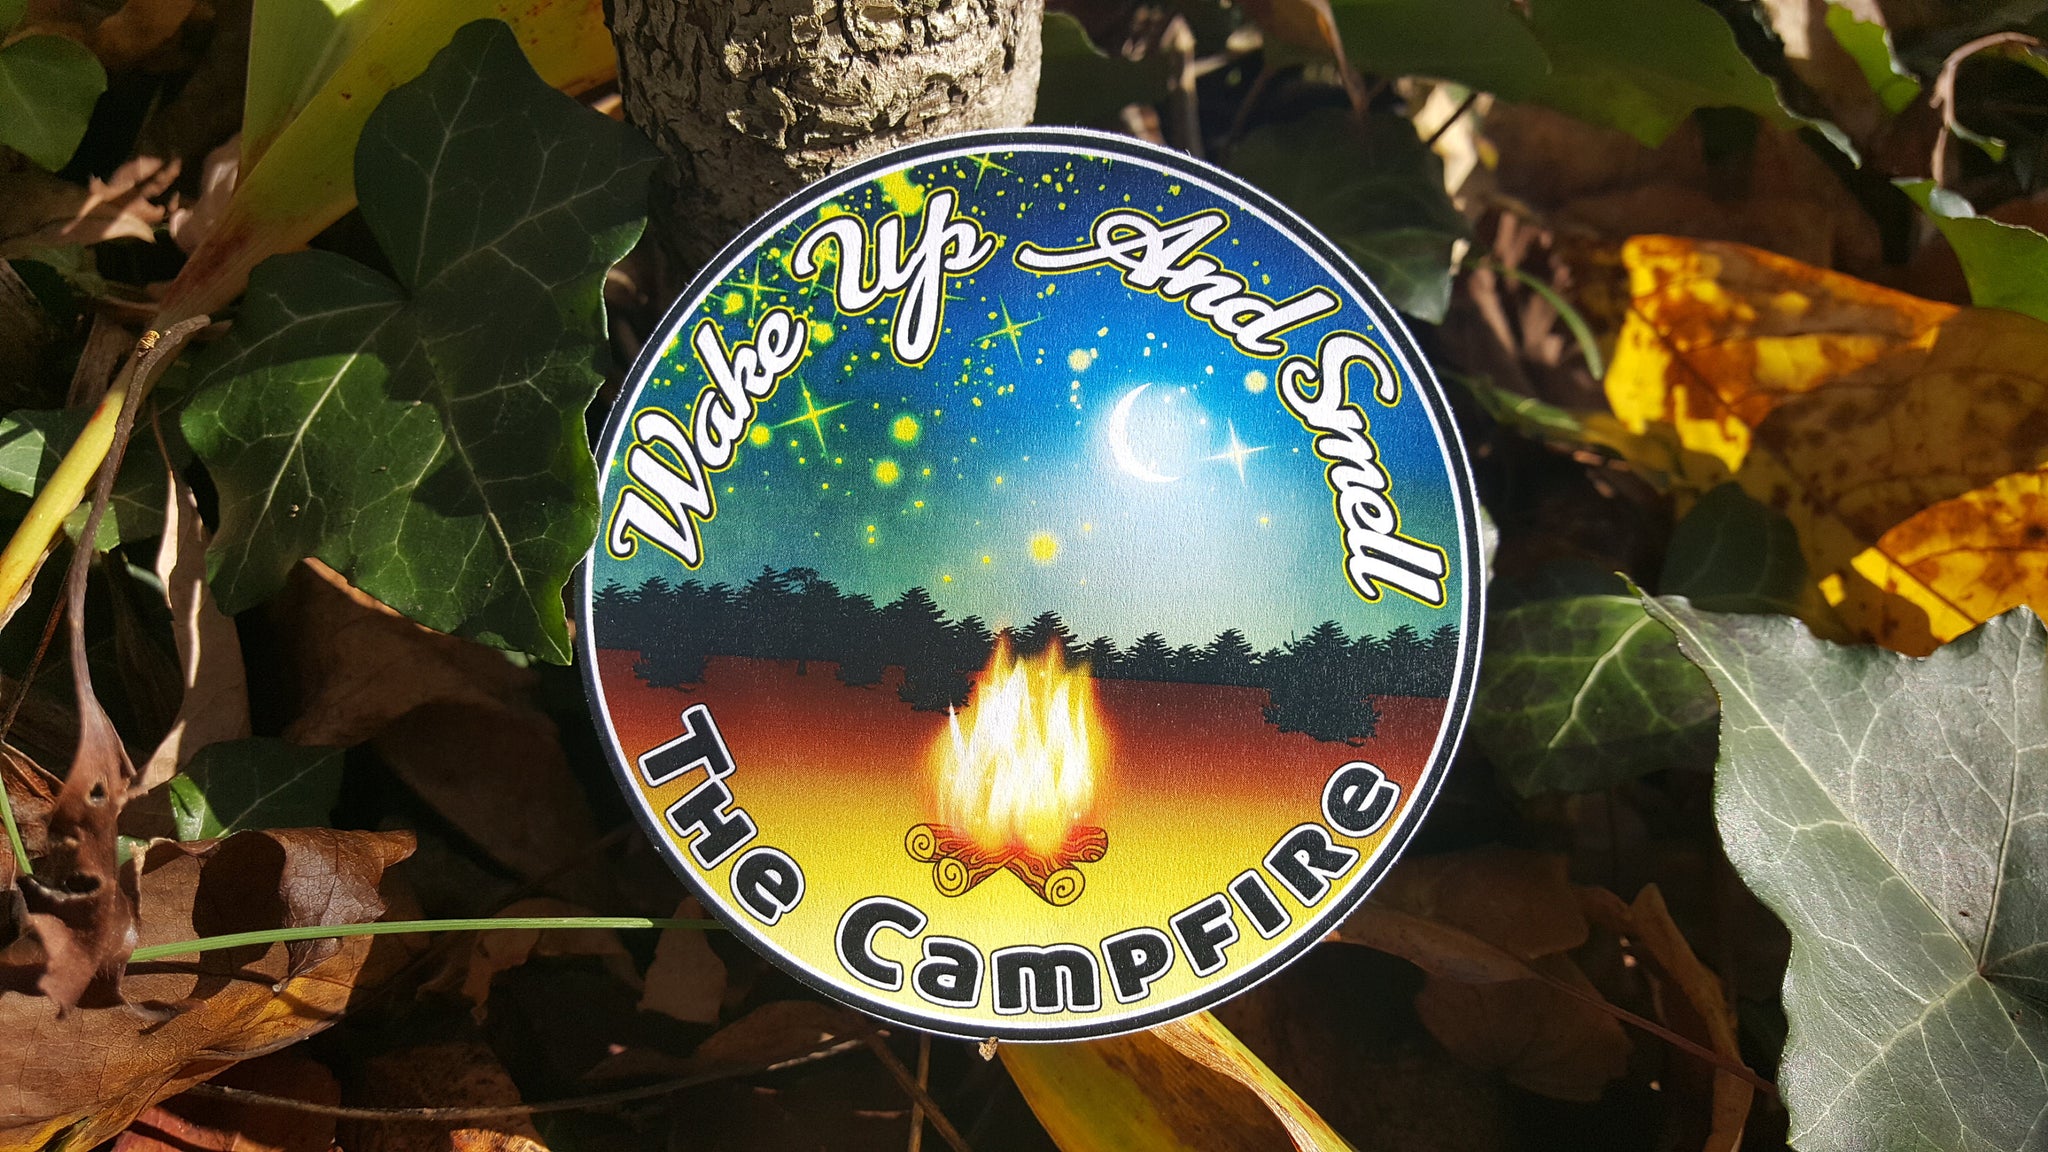 Camping National Park Wake Up And Smell The Campfire Sticker Decal Vinyl 3.5" x 3.5"